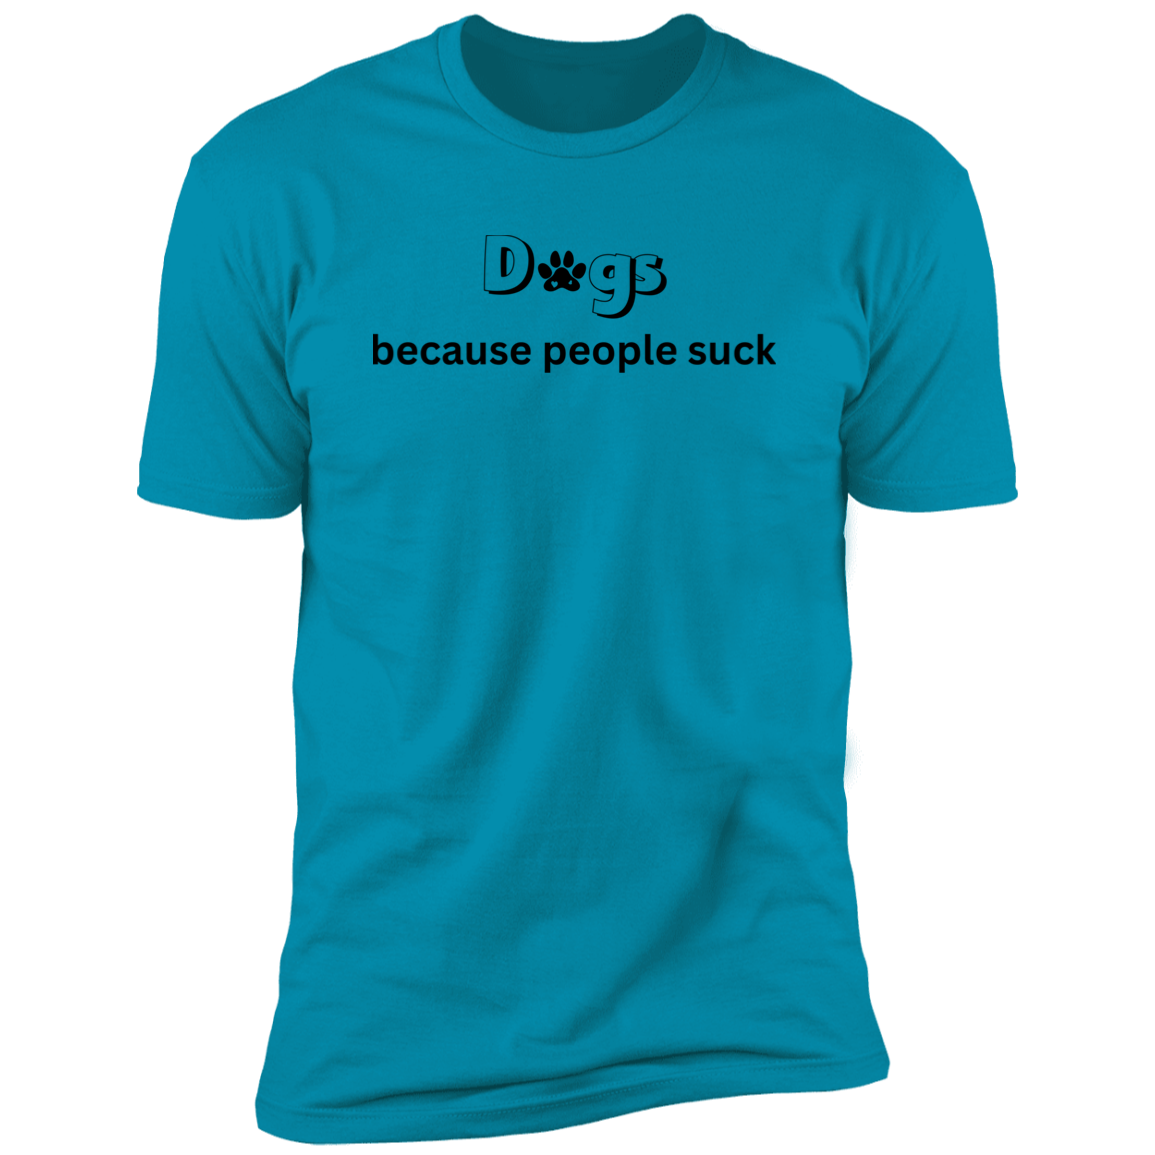 Dogs Because People Such t-shirt, funny dog shirt for humans, in turquoise